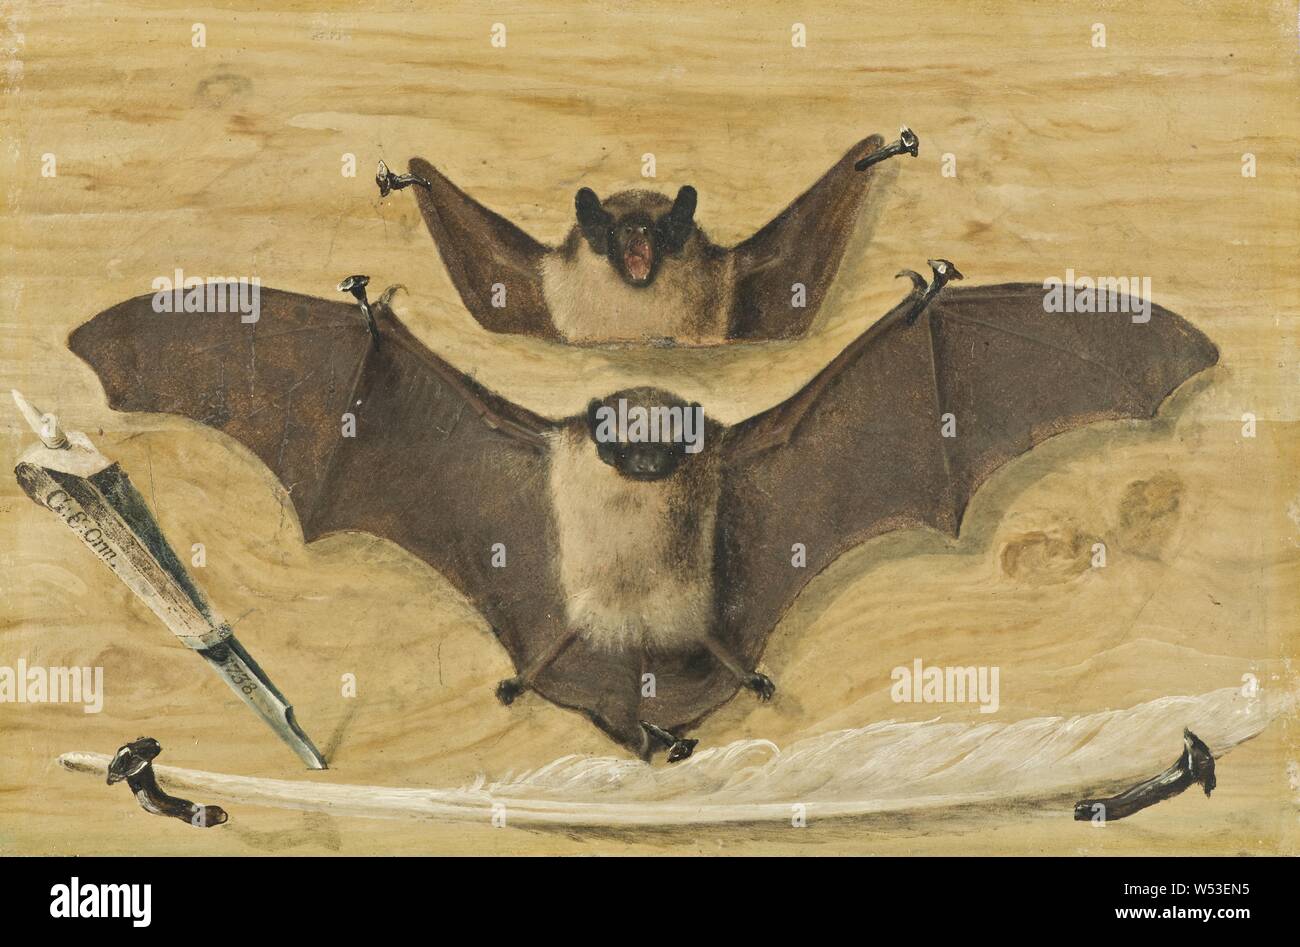 gabriel-orm-trompe-loeil-two-bats-nailed-to-a-timber-wall-knife-and-quill-pen-the-bat-painting-two-on-a-board-wall-with-nails-suspended-leather-patches-knife-and-quill-painting-1738-oil-on-paper-or-vellum-mounted-on-metal-oil-on-paper-or-parchment-laid-on-iron-plate-height-294-cm-115-inches-width-196-cm-77-inches-inscription-174-on-paper-note-tergo-signed-g-e-orm-1738-on-knife-tv-about-the-bat-W53EN5.jpg